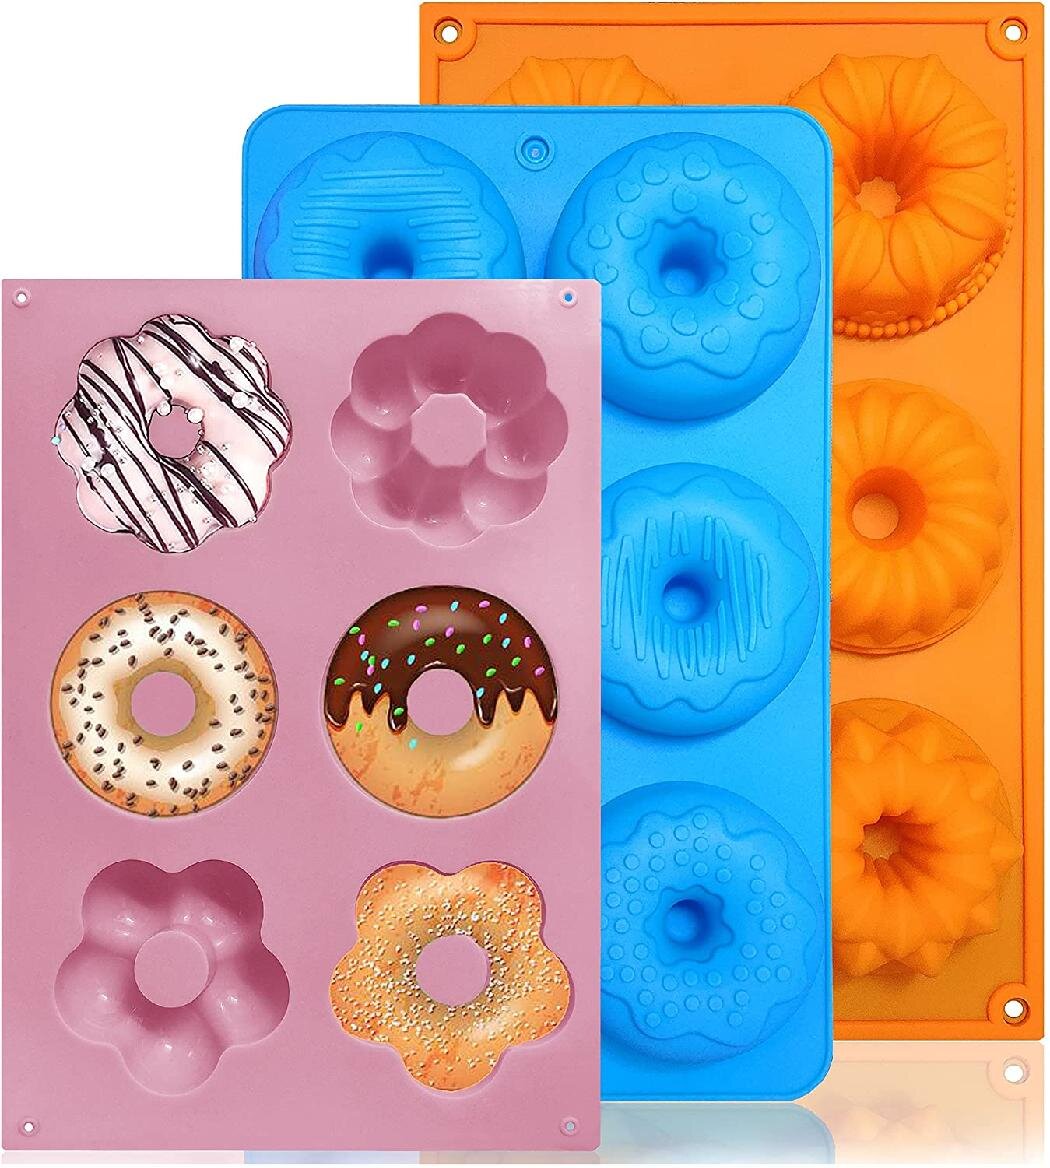 Bagels and More Silicone Donut Pan,2pcs Non-Stick Mold,Silicone Donut Mold for 6 Full-Size Donuts